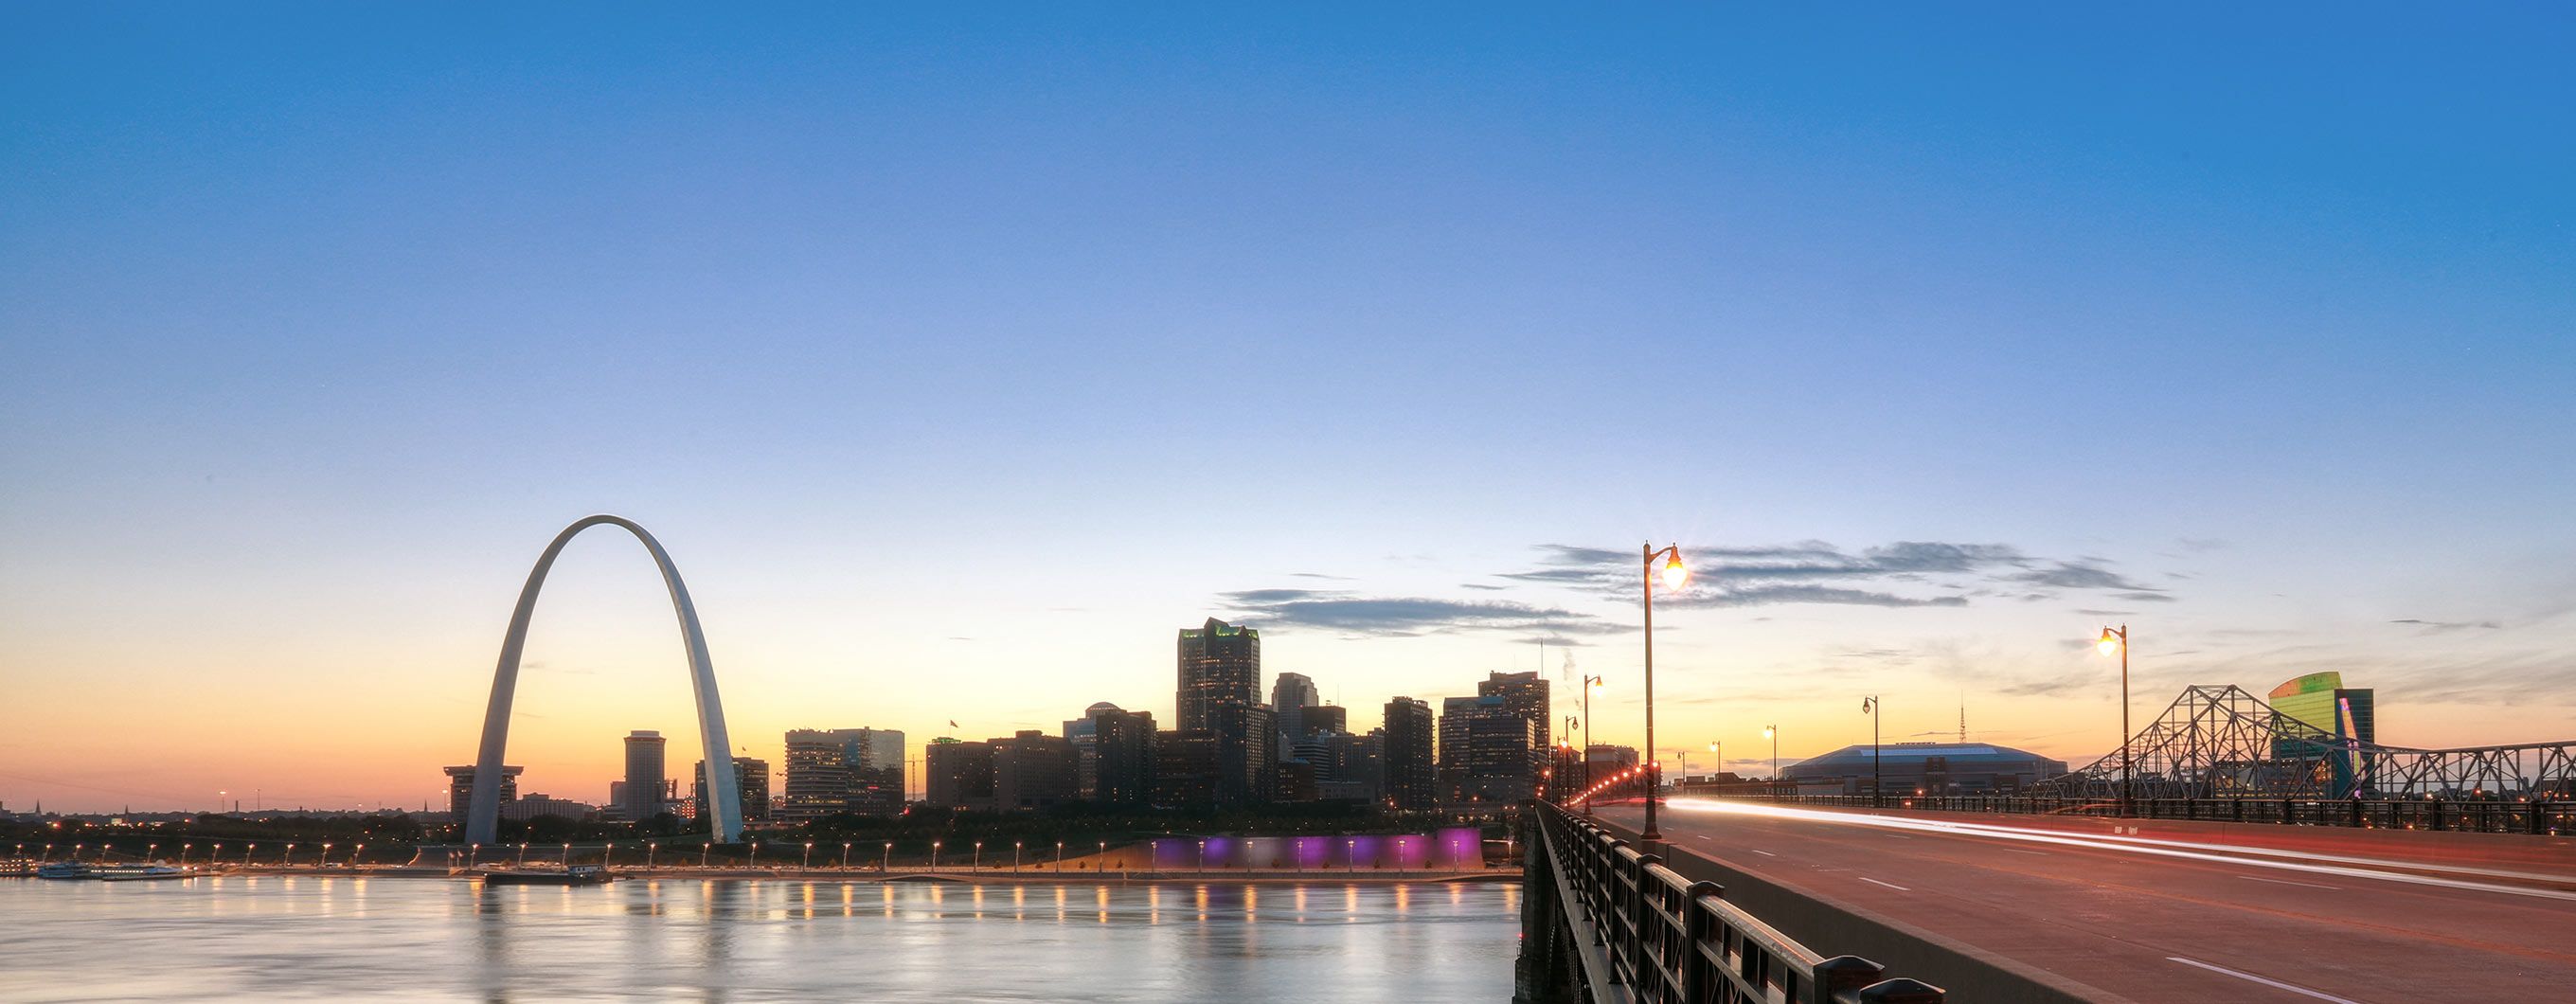 Image of the St Louis skyline with a bridge, water and an arch